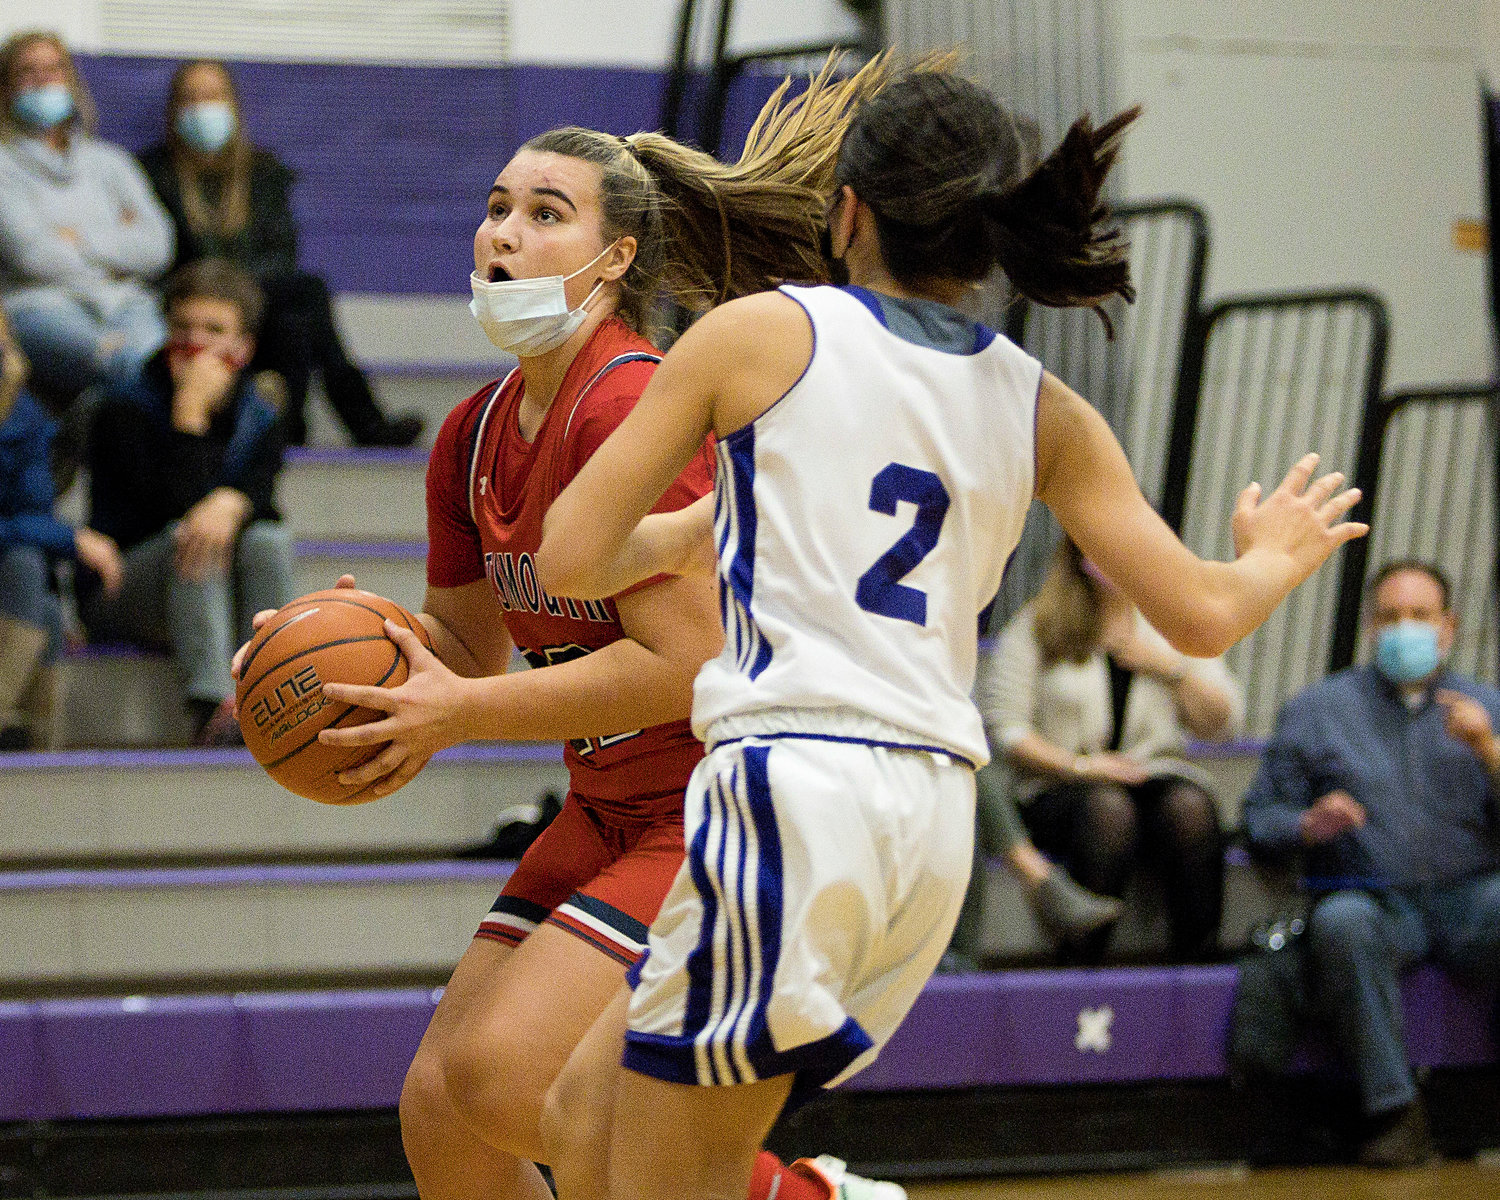 Portsmouth High’s Emily Maiato goes in for a layup during Thursday's Injury Fund game against Mt. Hope in Bristol.